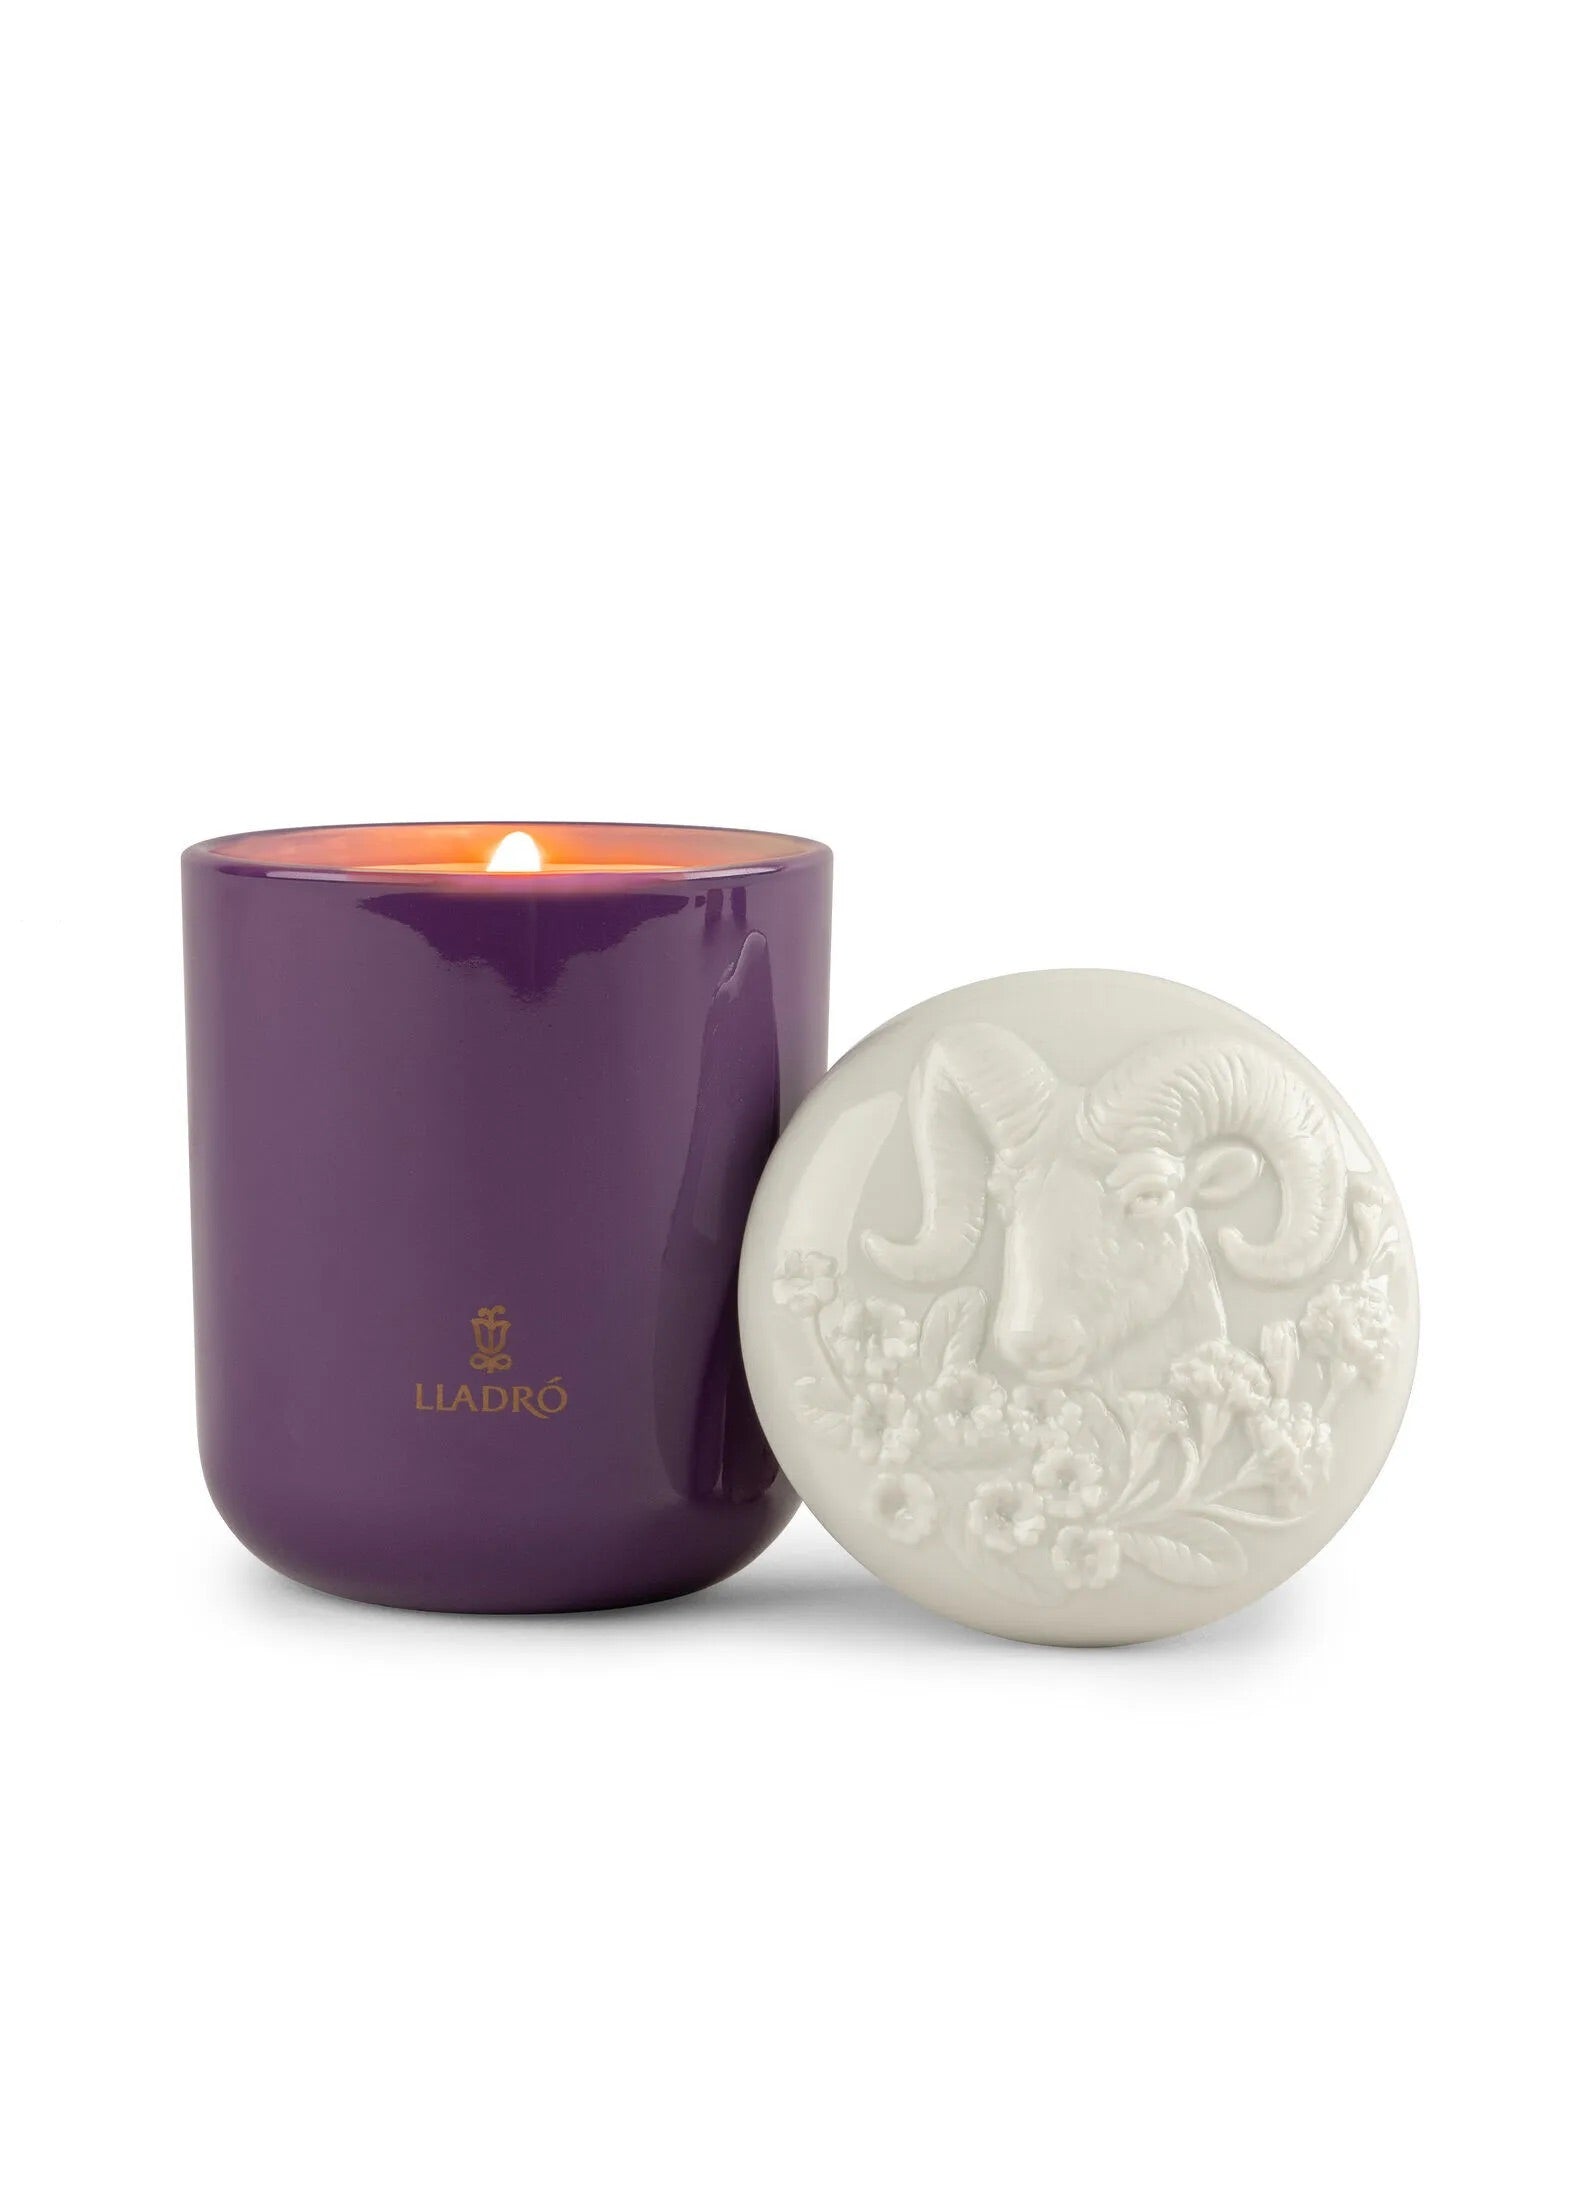 Zodiac Scented Candles Collection - FormFluent